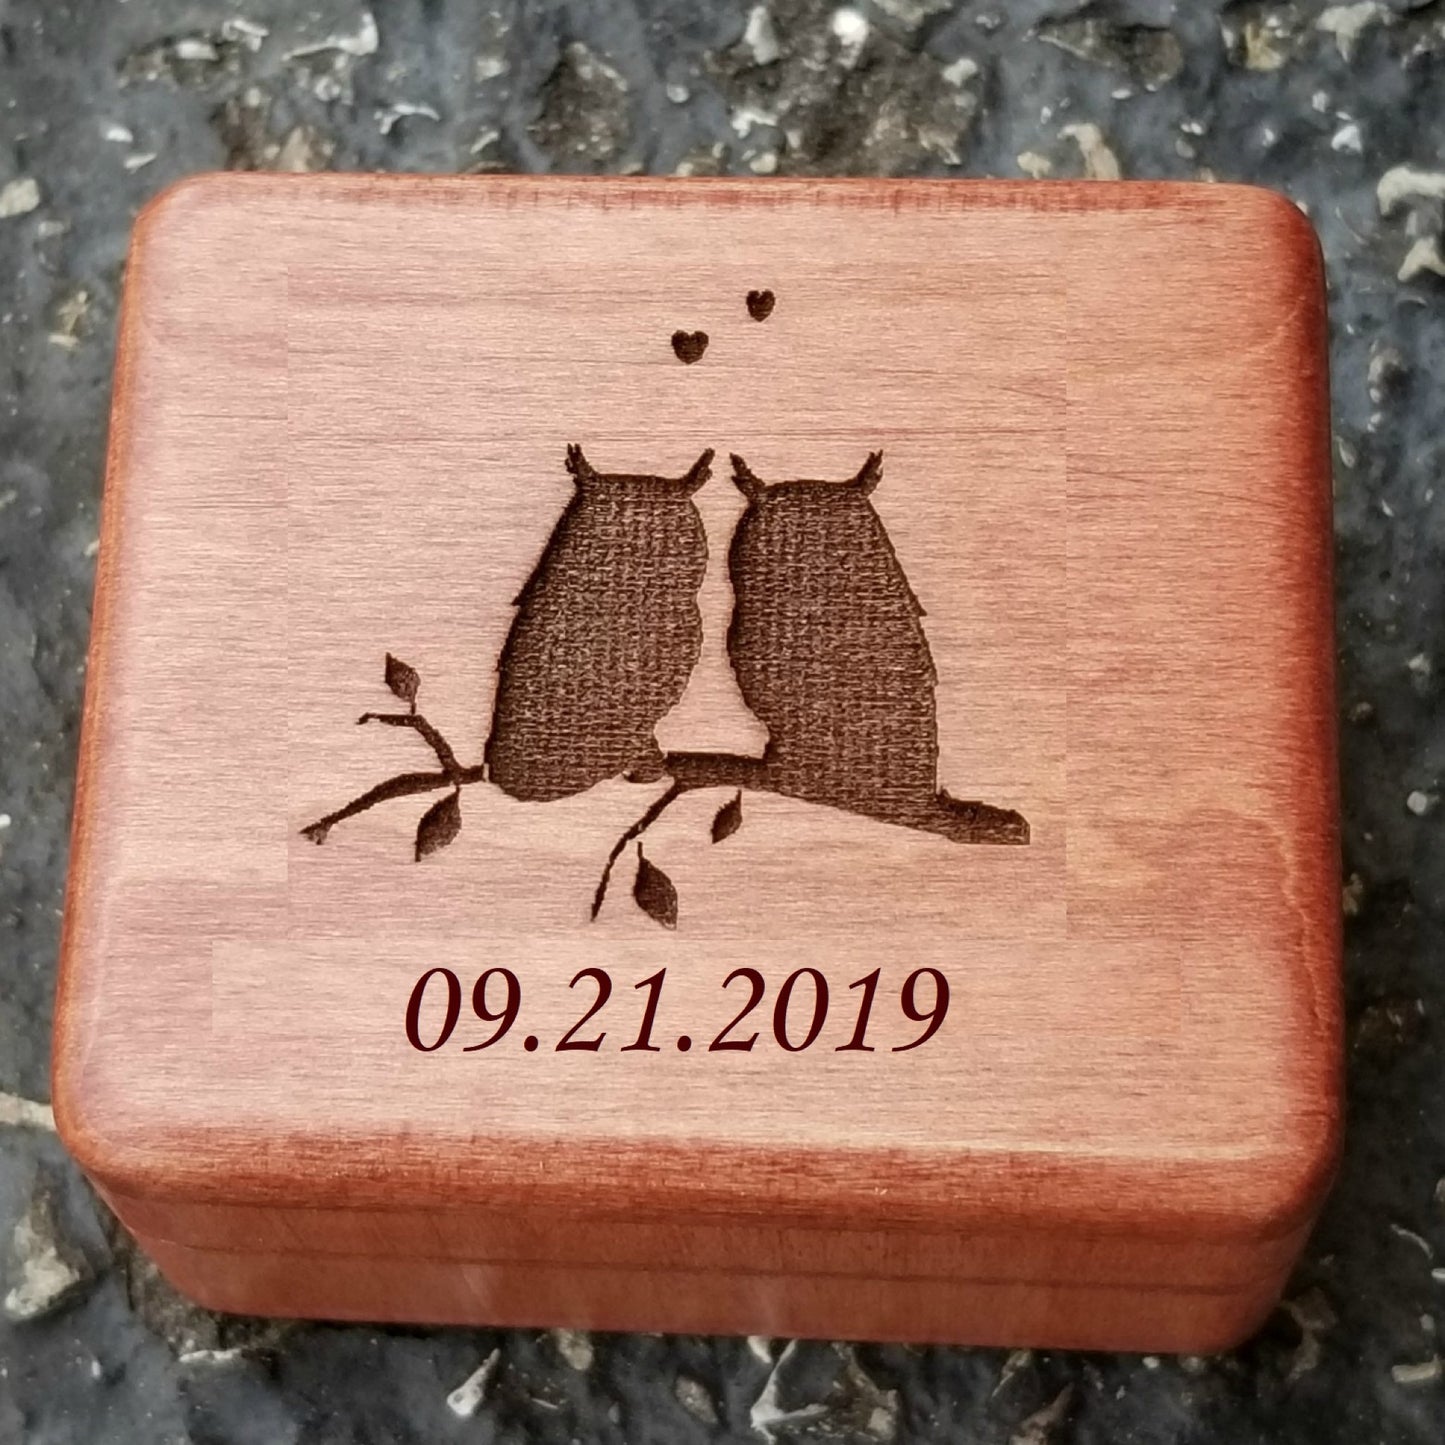 love owls ring box with date engraved on top